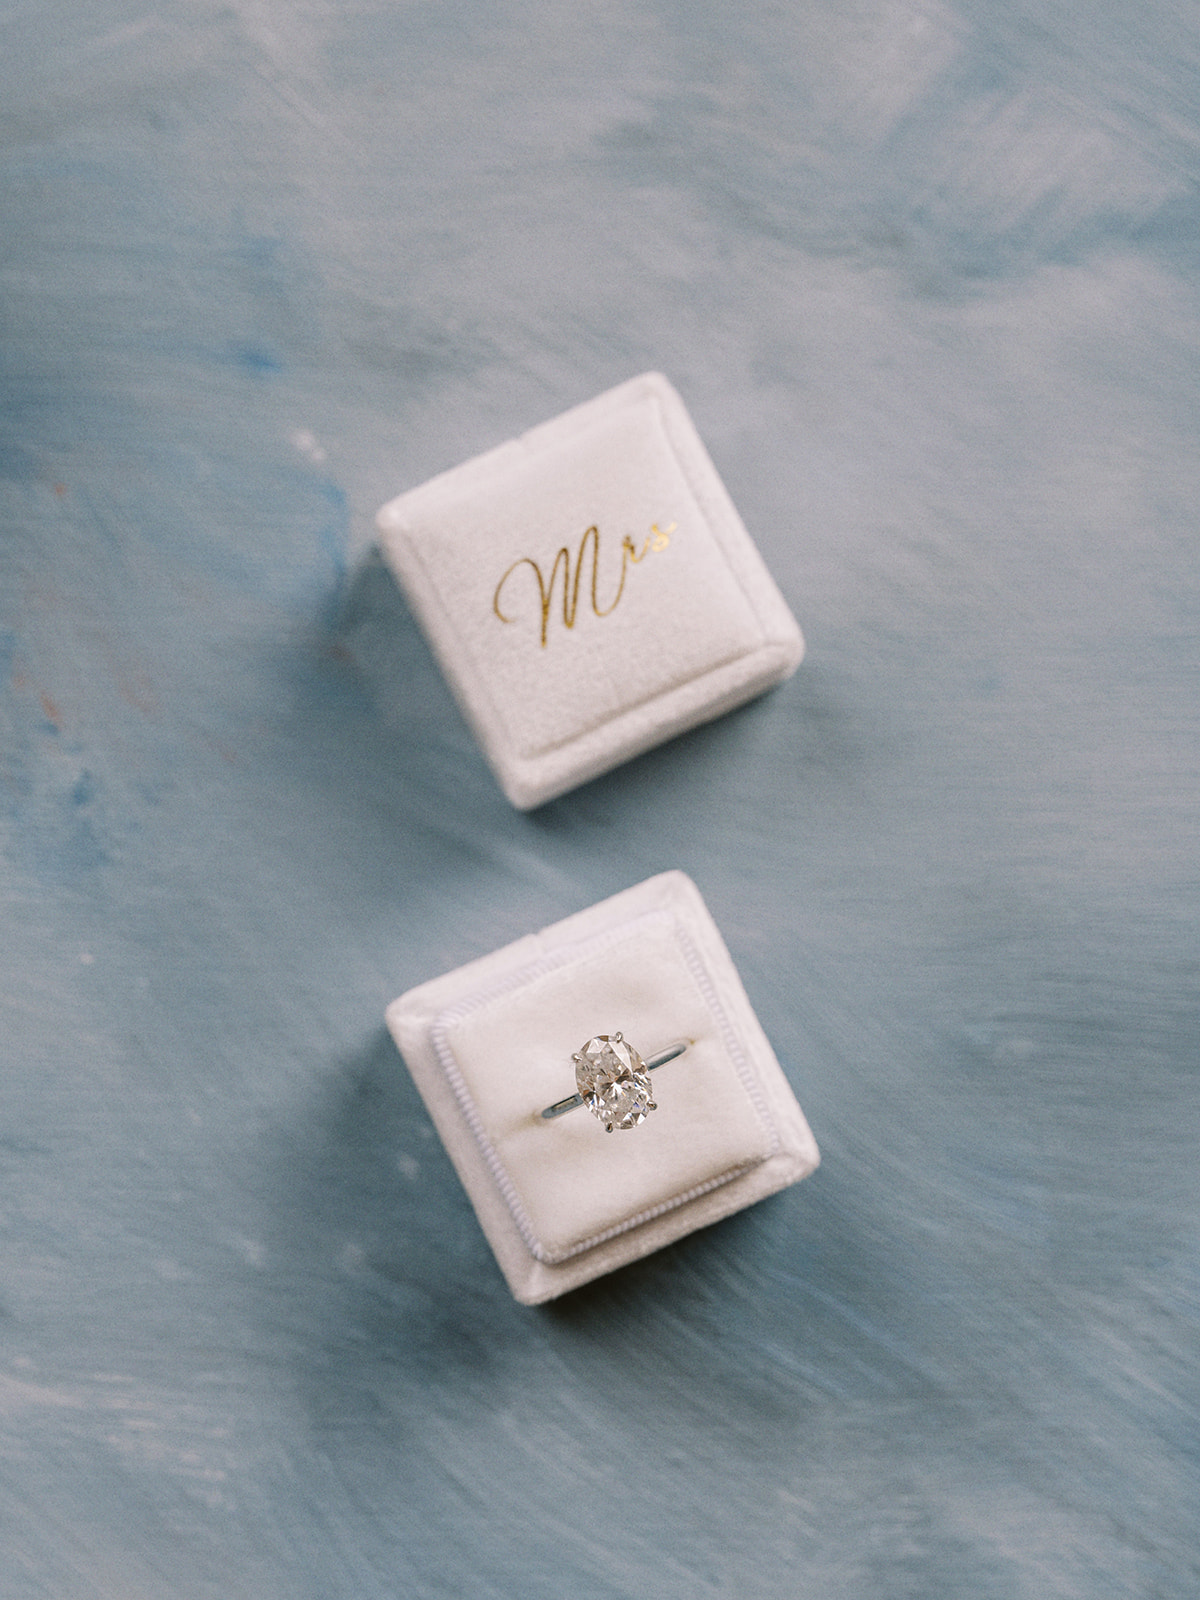 Elegant wedding ring box with gold “Mrs.” lettering captured by Justine Milton.